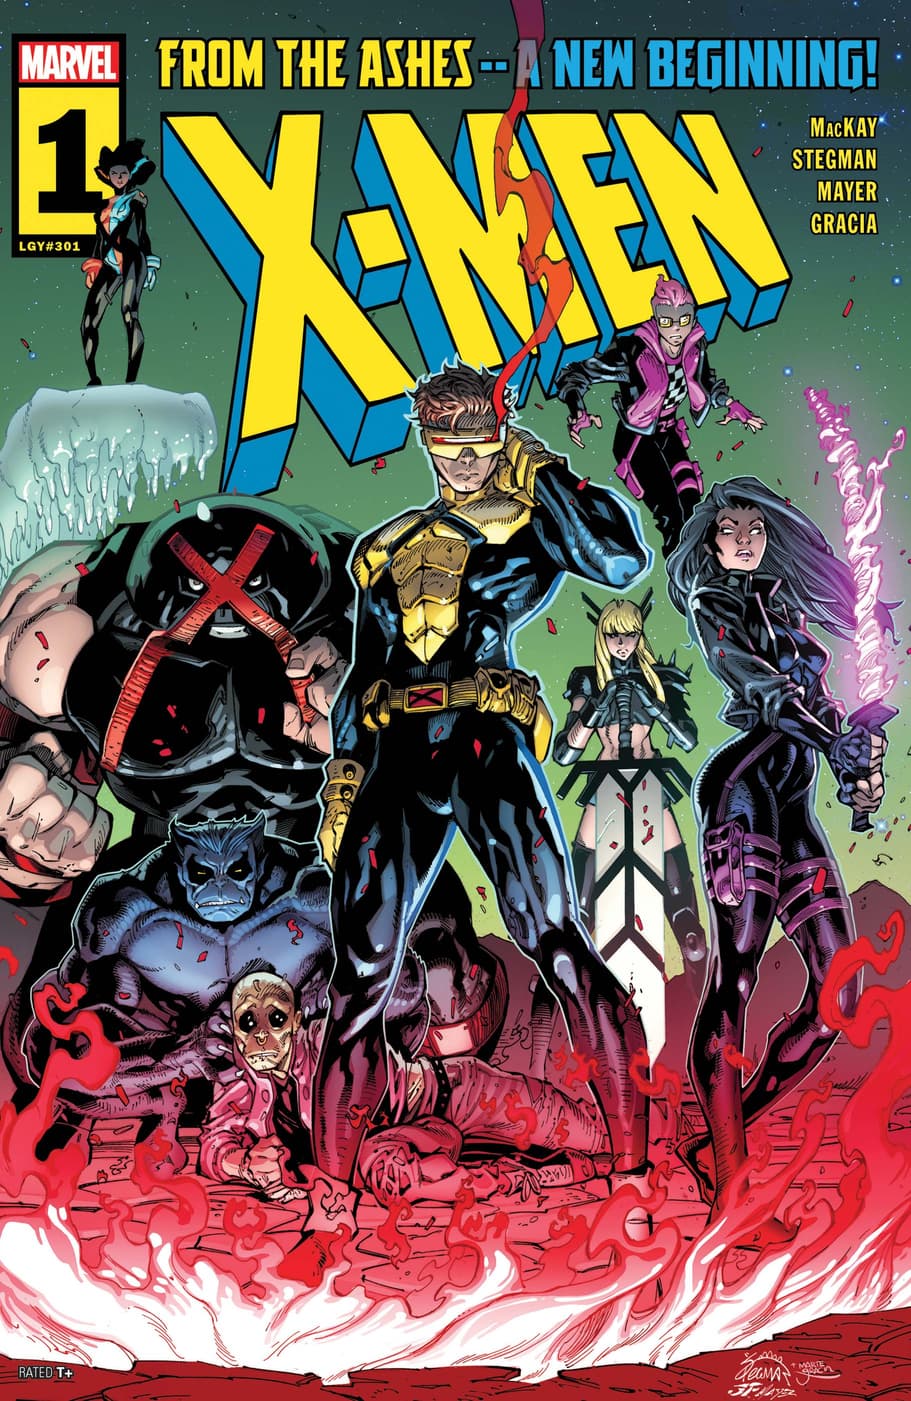 X-Men' #1 Launch Trailer Officially Kicks Off the From the Ashes Era |  Marvel